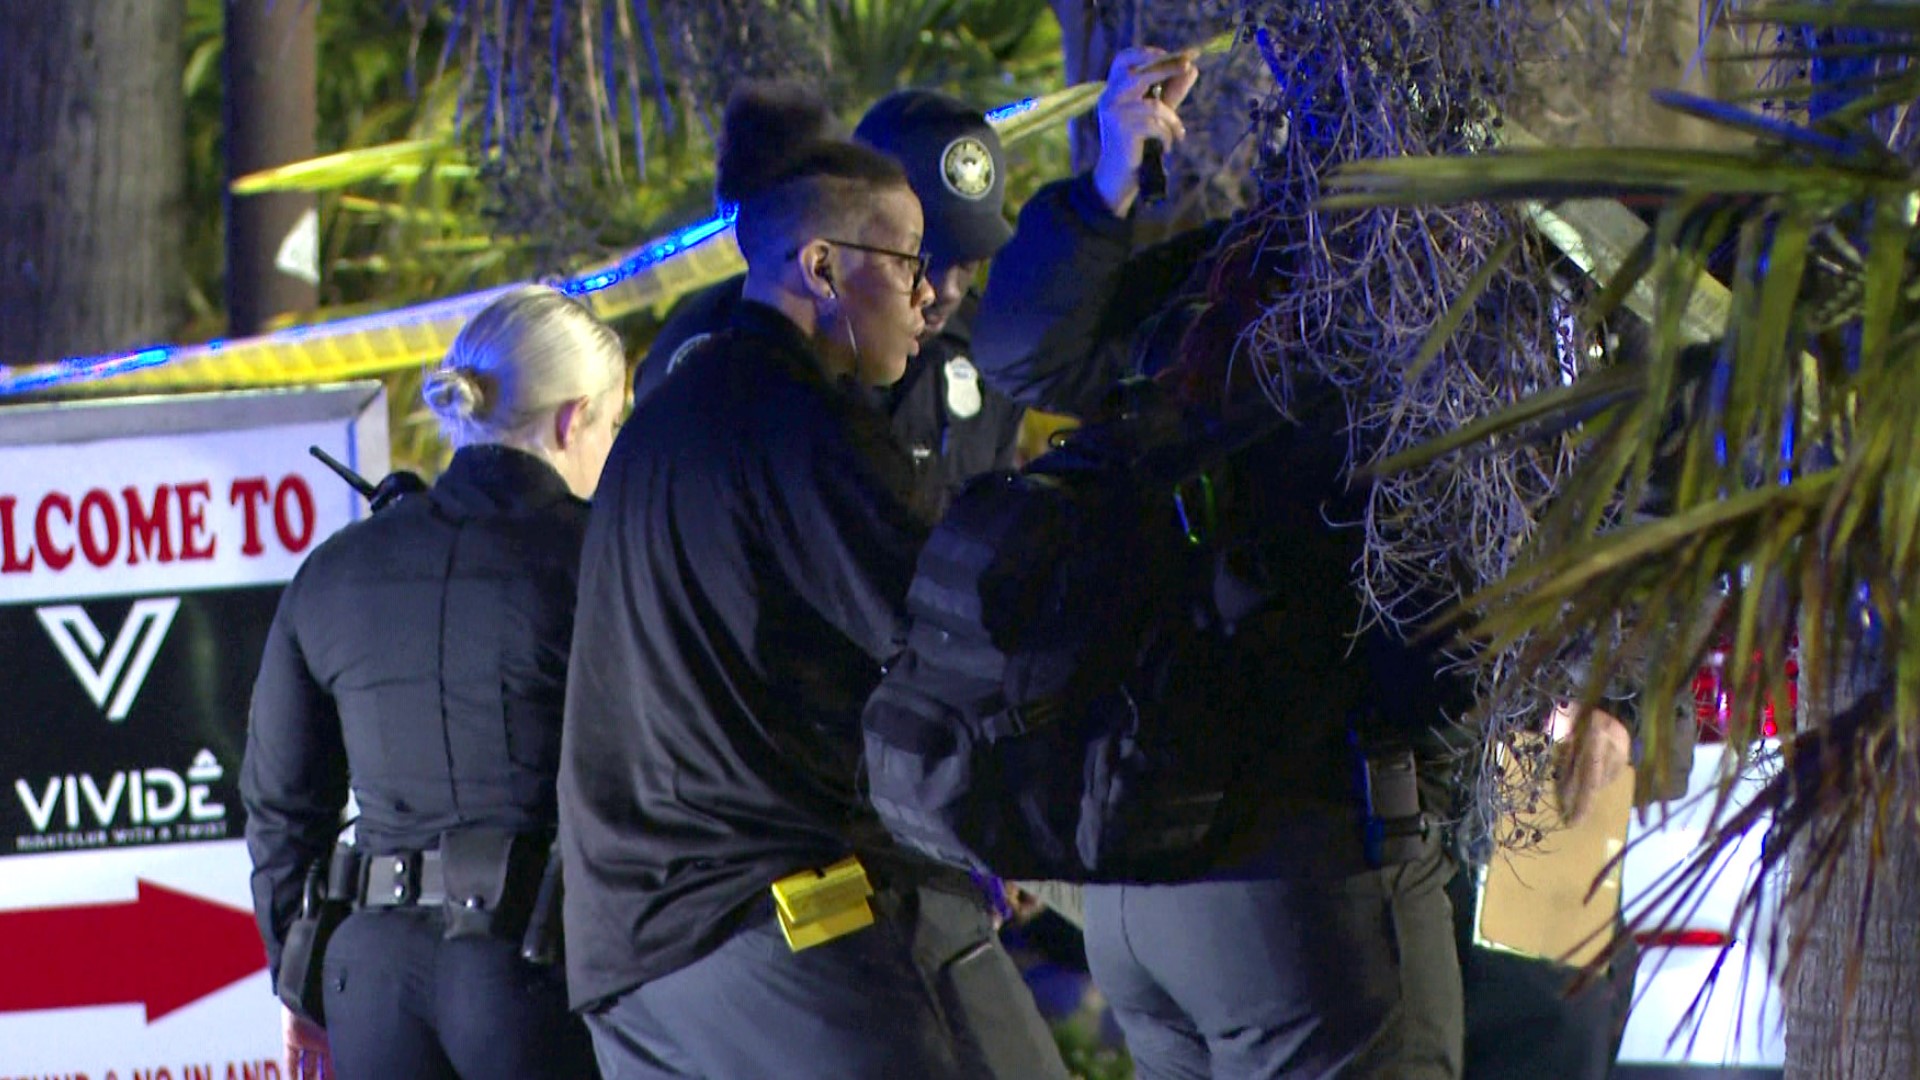 The first happened around 9 p.m. when officers responded to 2500 Center Street in northwest Atlanta. A man was taken to the hospital in stable condition when he was